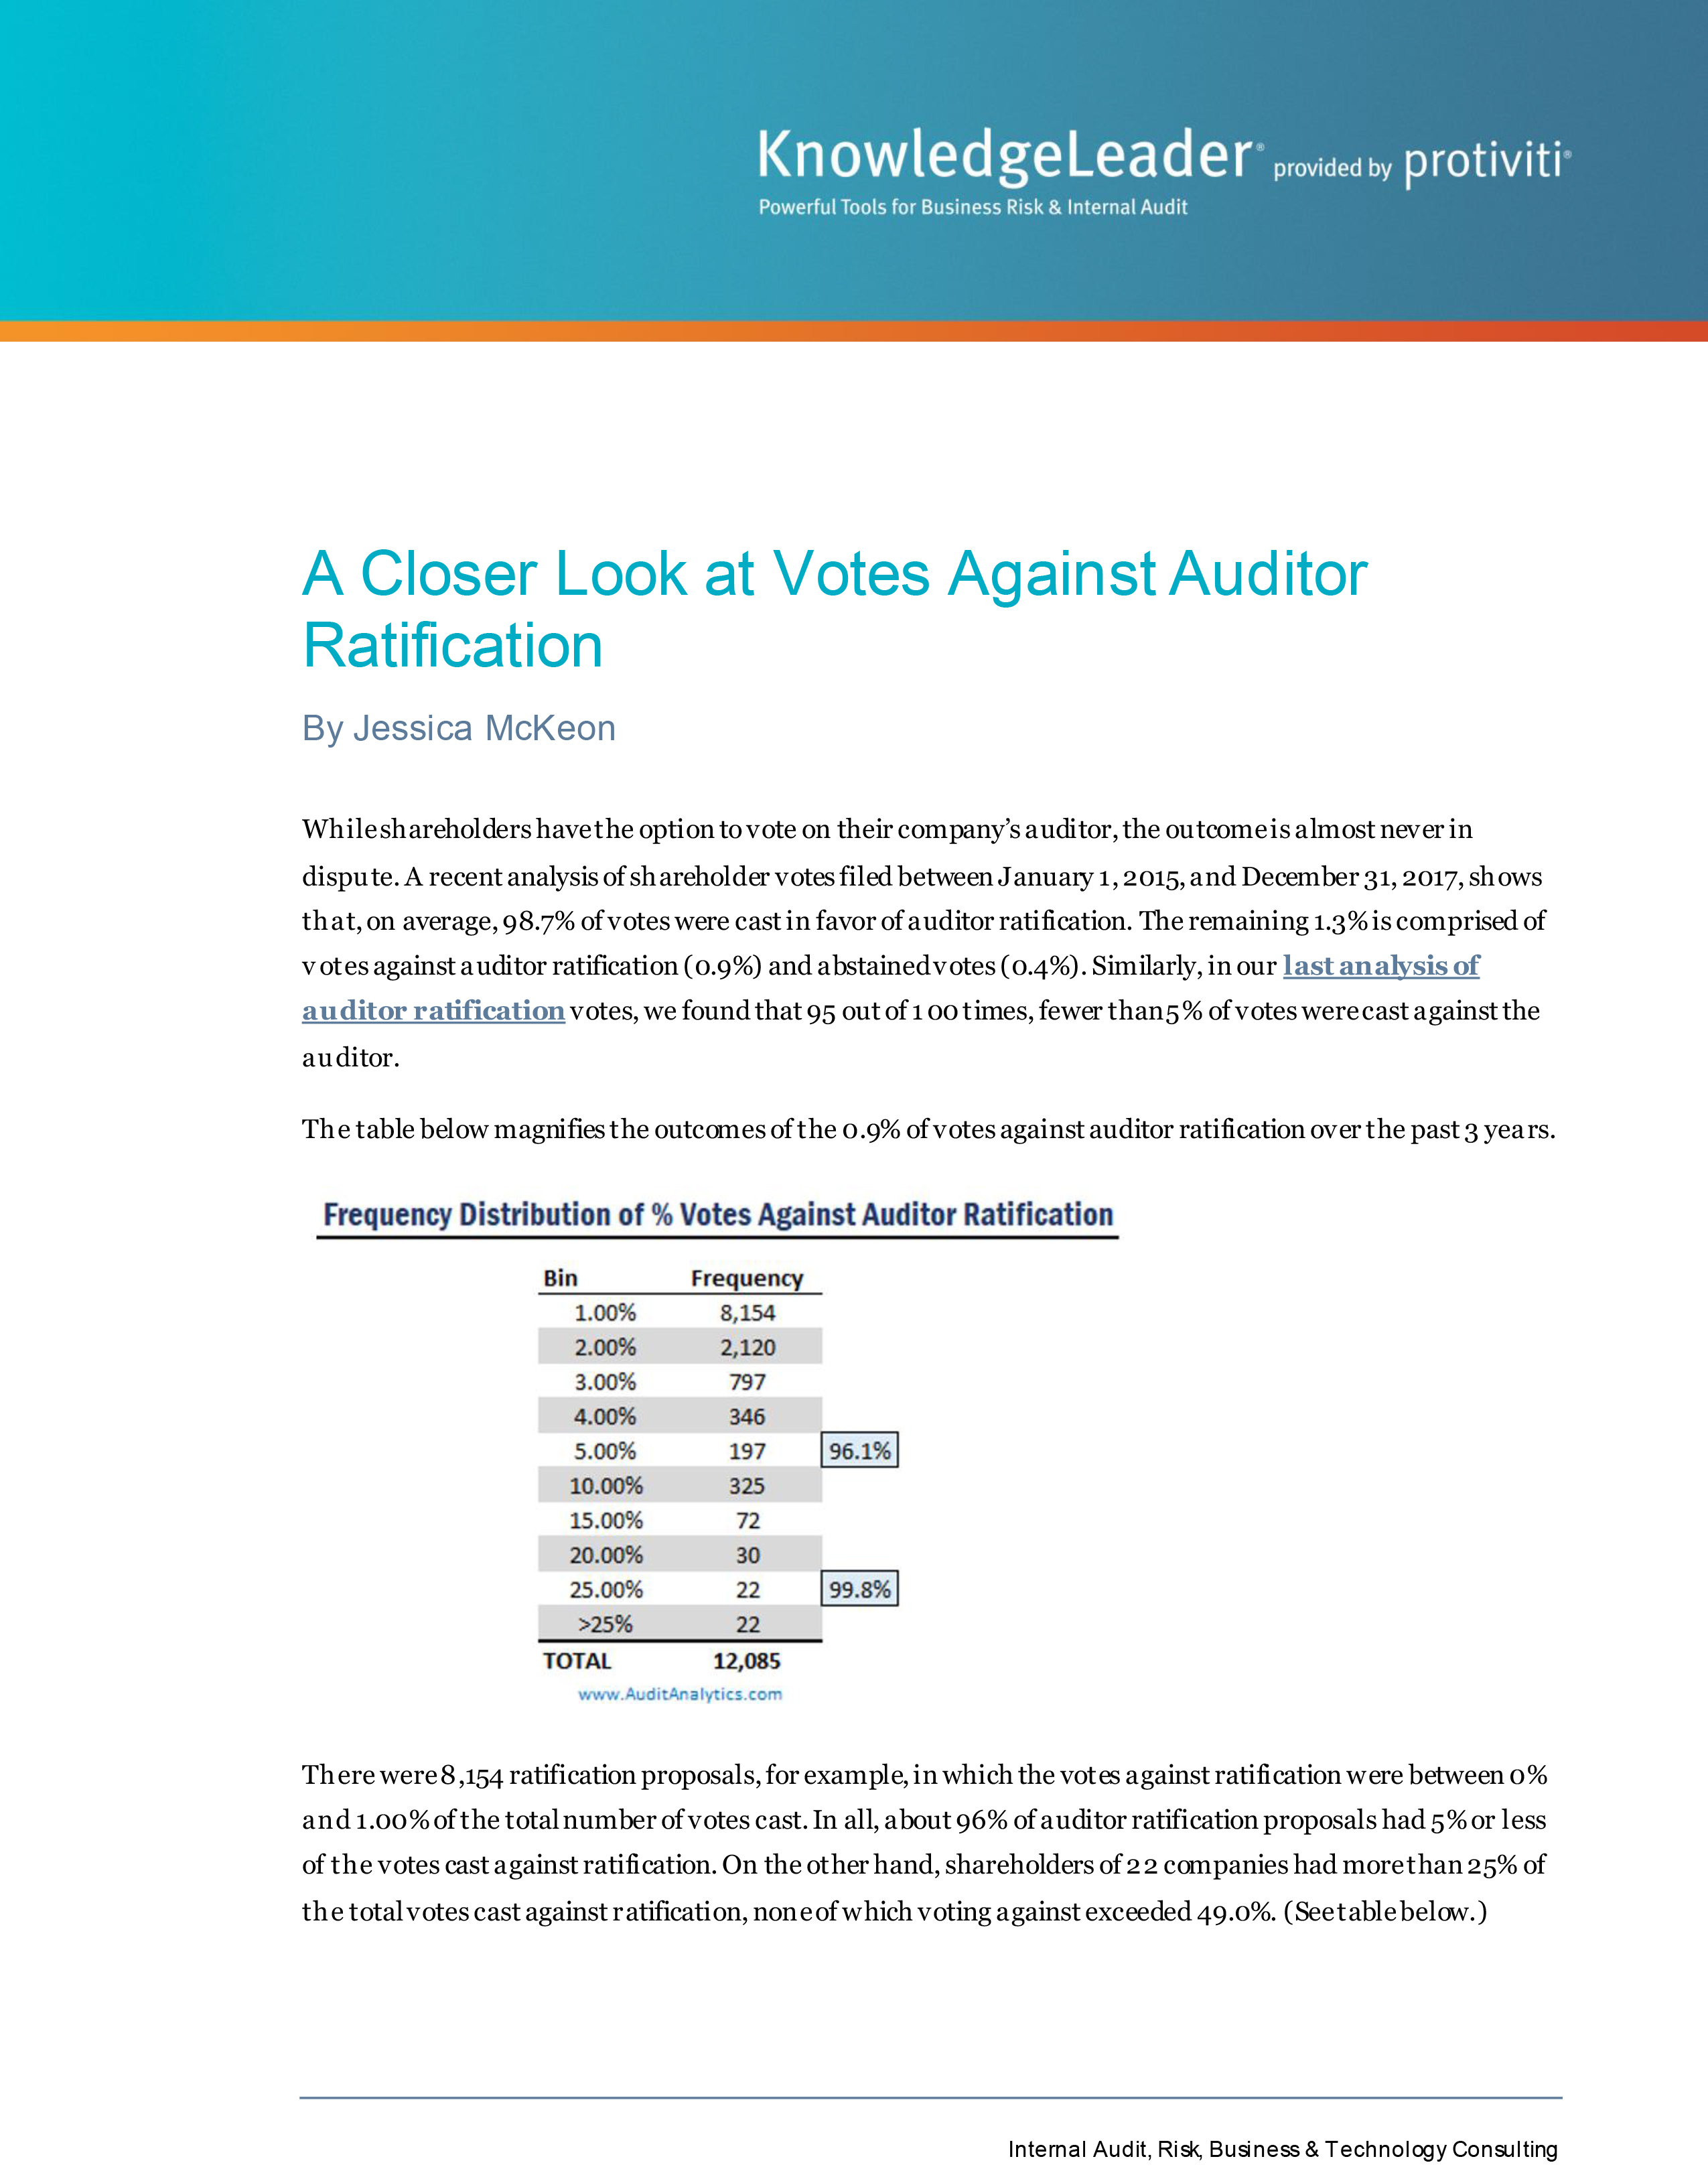 Screenshot of the first page of A Closer Look at Votes Against Auditor Ratification 5.28.18